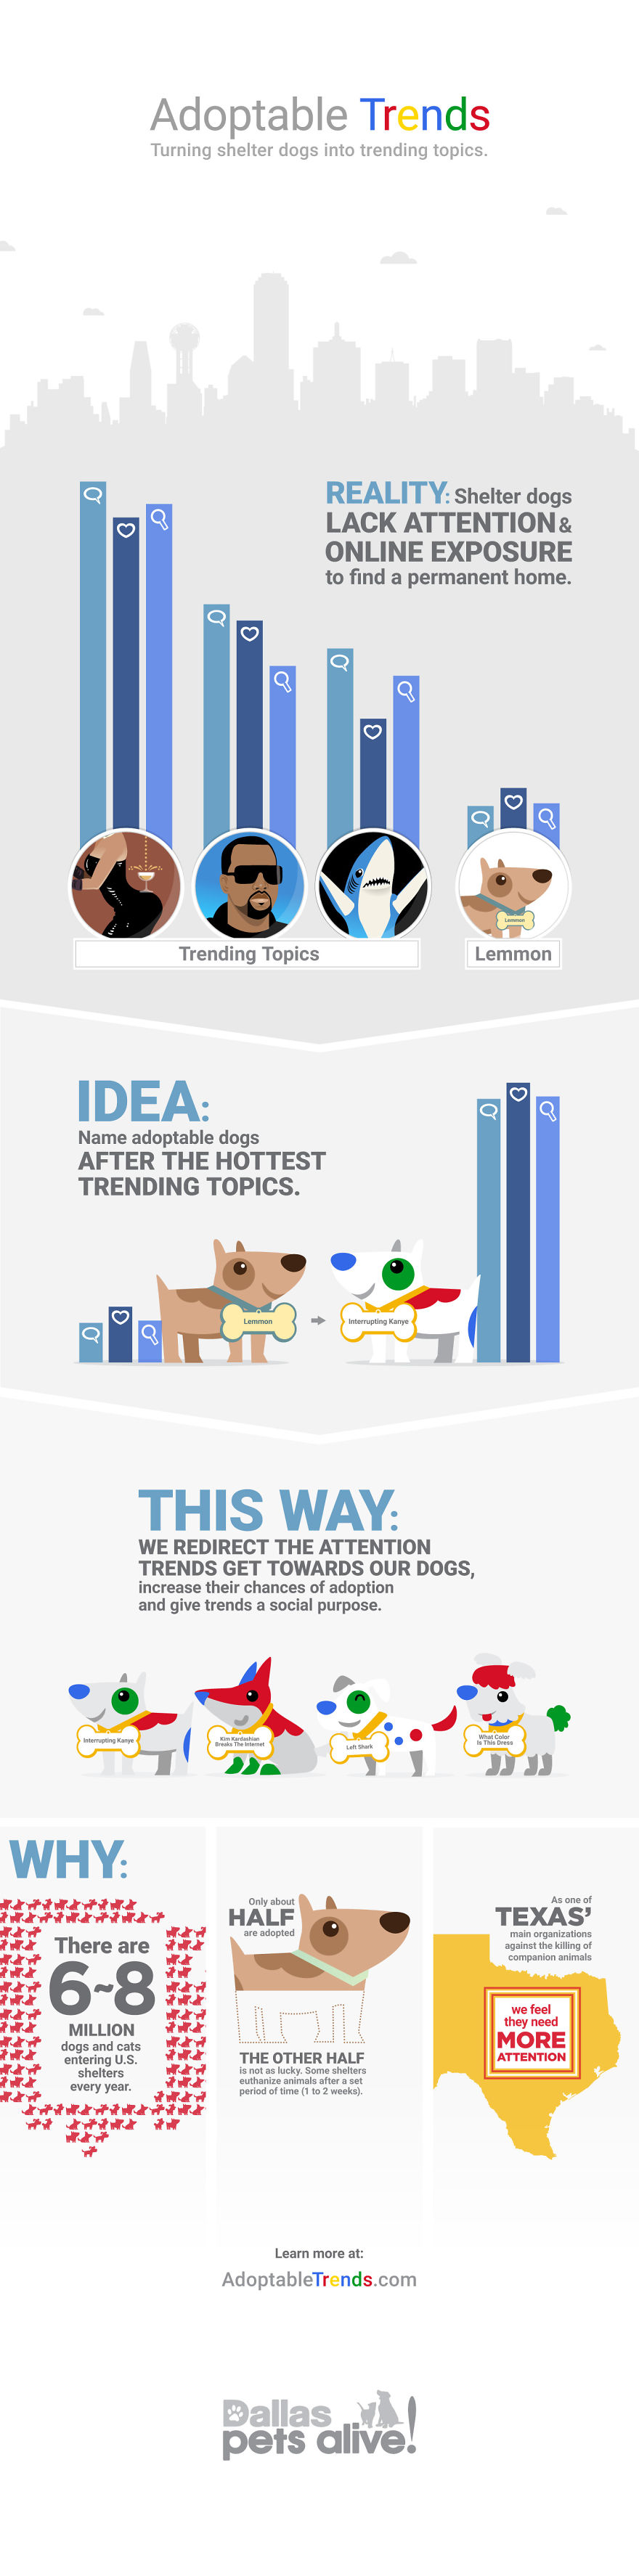 #adoptabletrends Are Trends That You Can Take Home, Feed, Cuddle, Play And Run With.